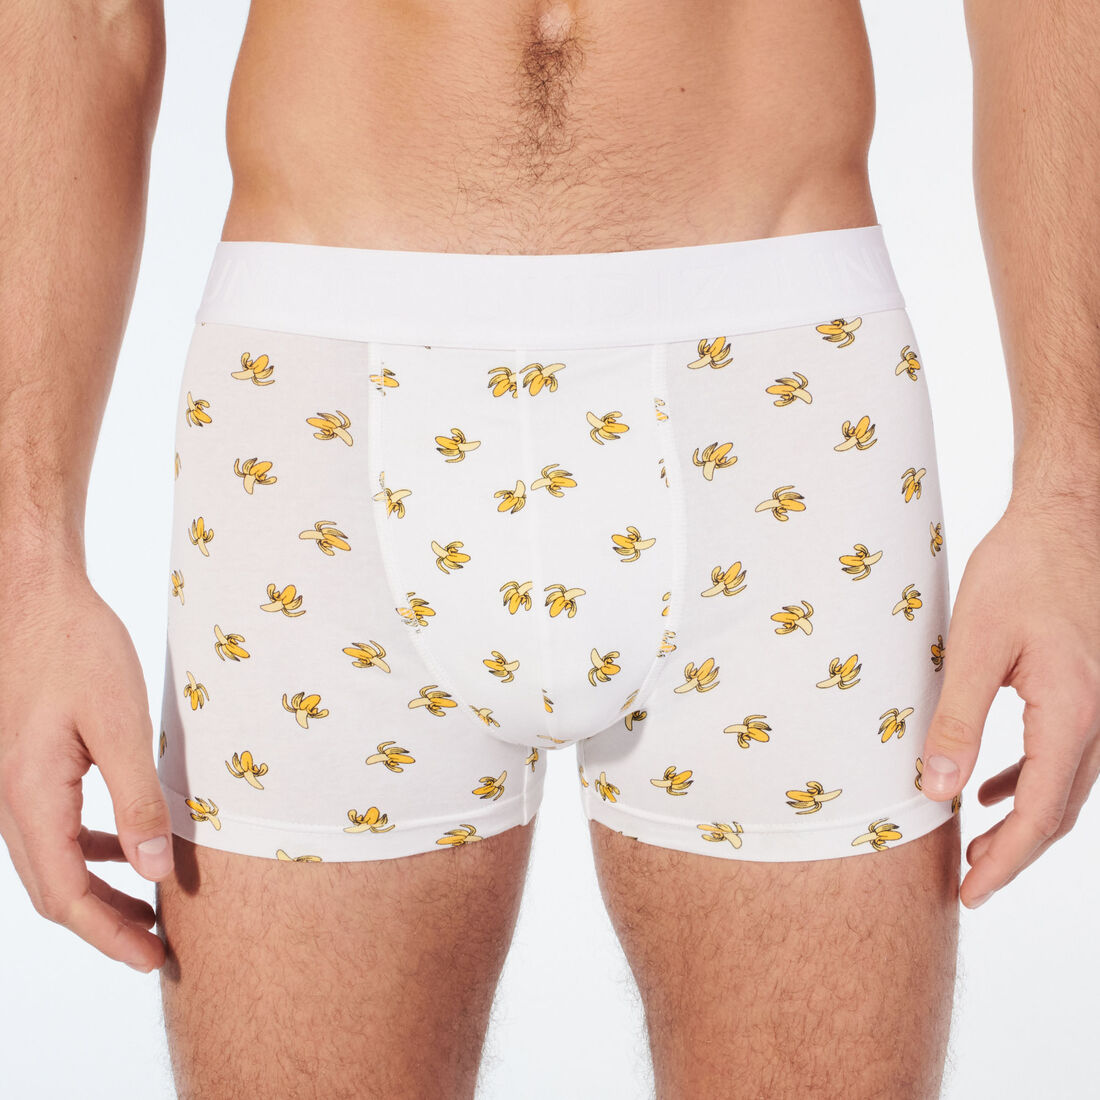 cotton boxer shorts with bananas pattern;